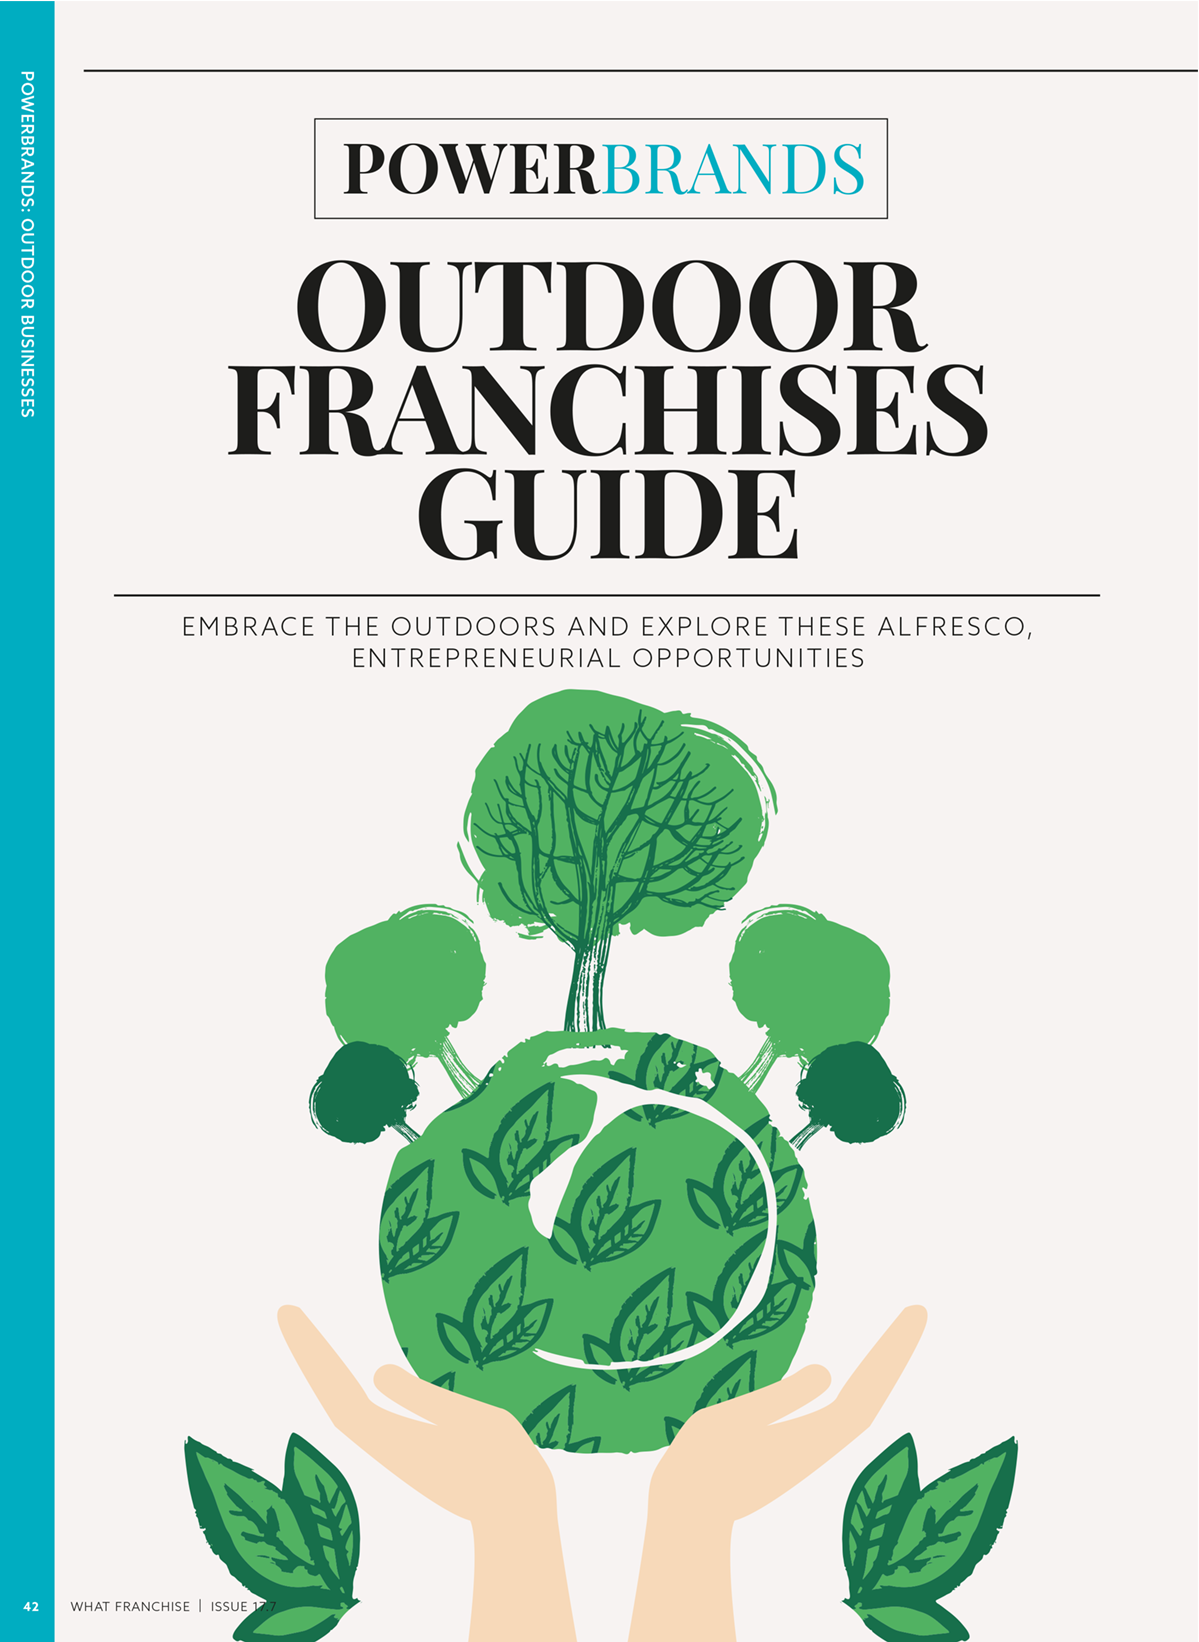 Powerbrands: Outdoor Franchises Guide